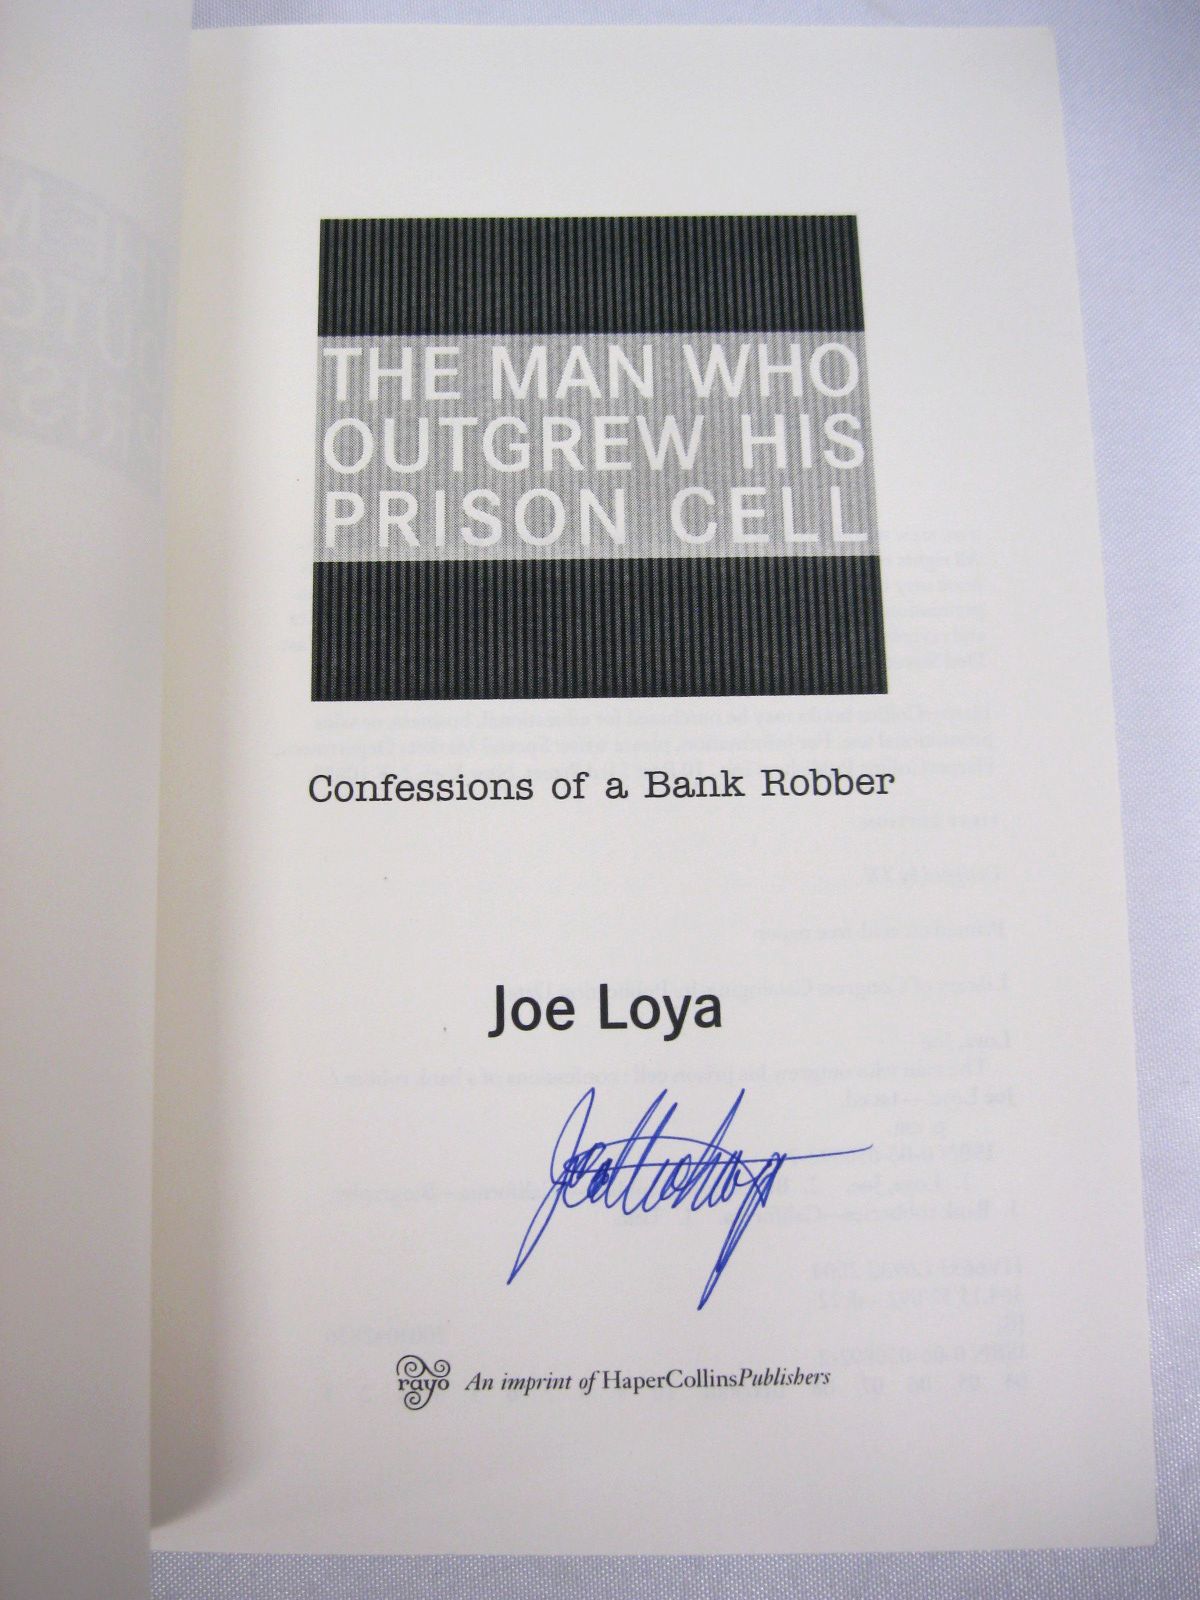 The Man Who Outgrew His Prison Cell: Confessions of a Bank Robber by Joe Loya